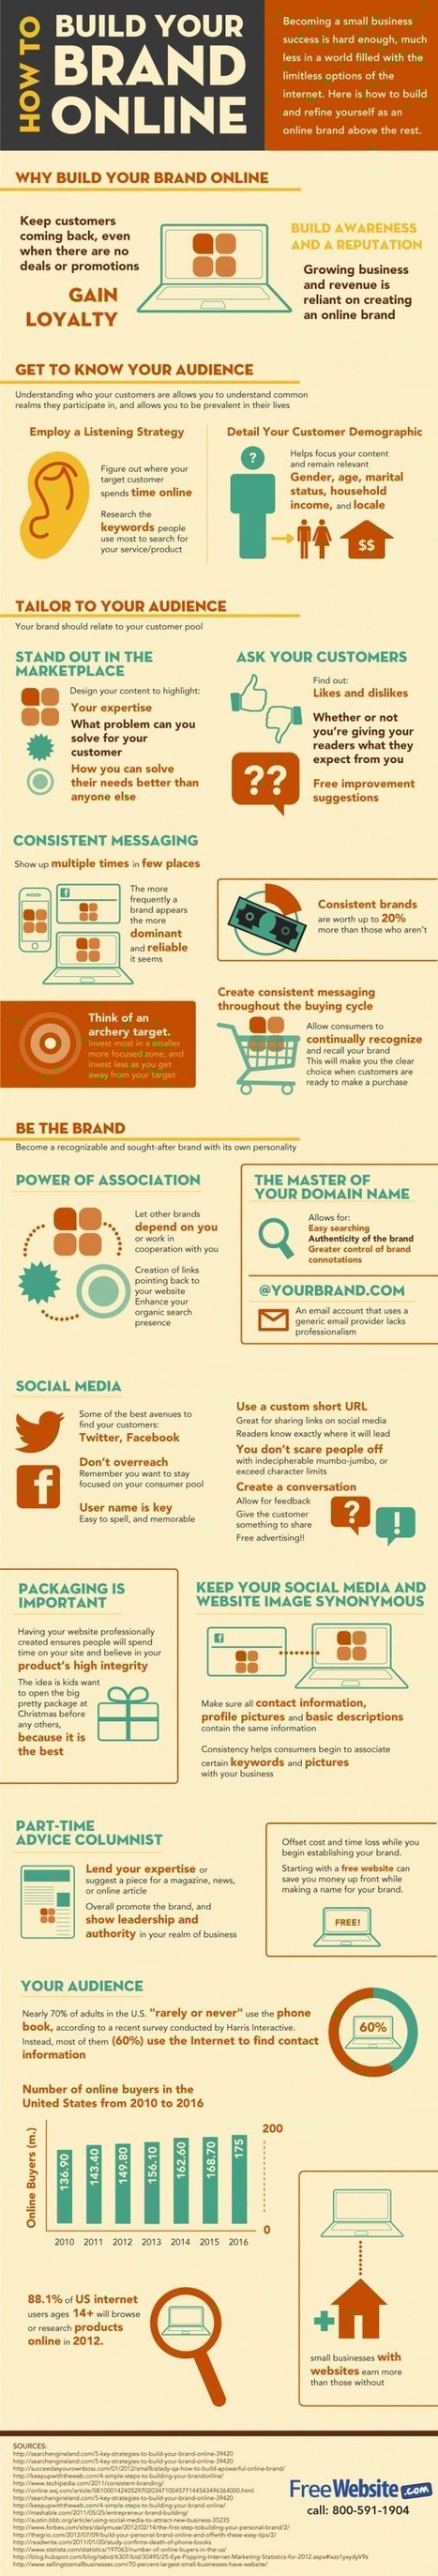 Why You Need to Build Your Brand Online [infographic] | Business Improvement and Social media | Scoop.it